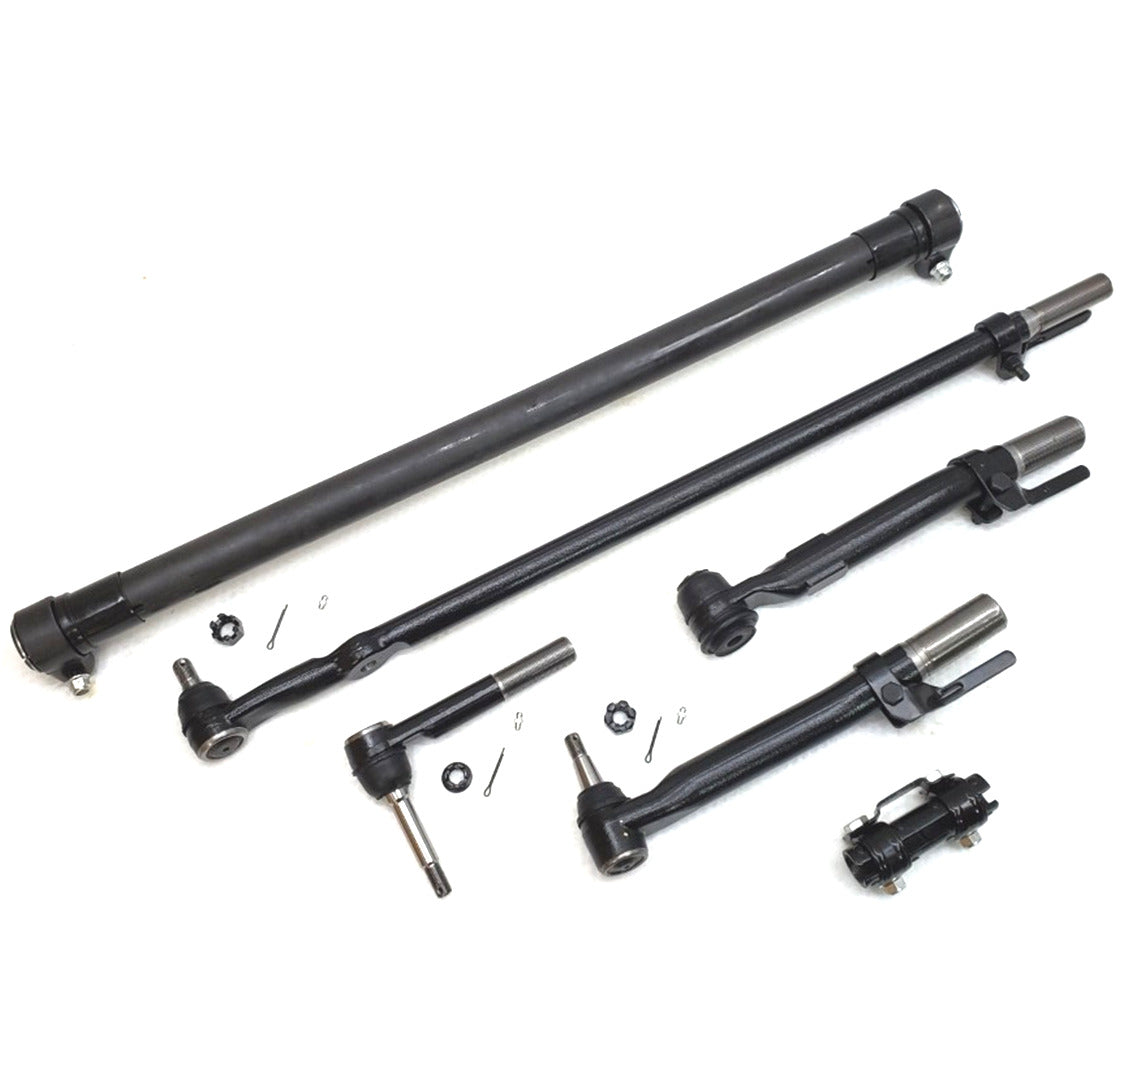 Lifetime Tie Rod Drag Link Sleeves Steering Kit for 2011-2016 Ford F250, F350 Super Duty 4x4 SRW